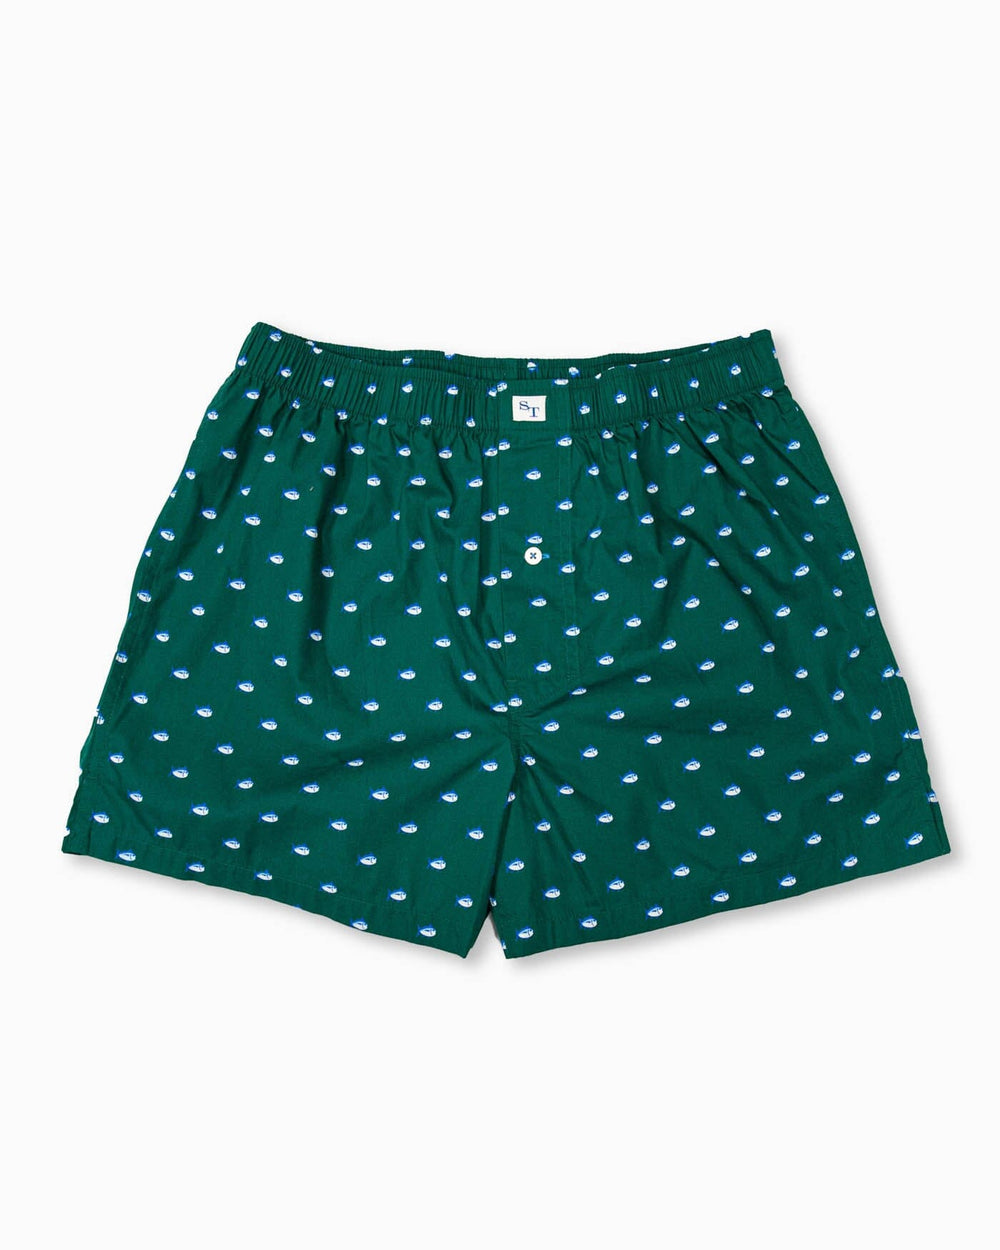 The front view of the Southern Tide Skipjack Boxer Short by Southern Tide - Cedar Green